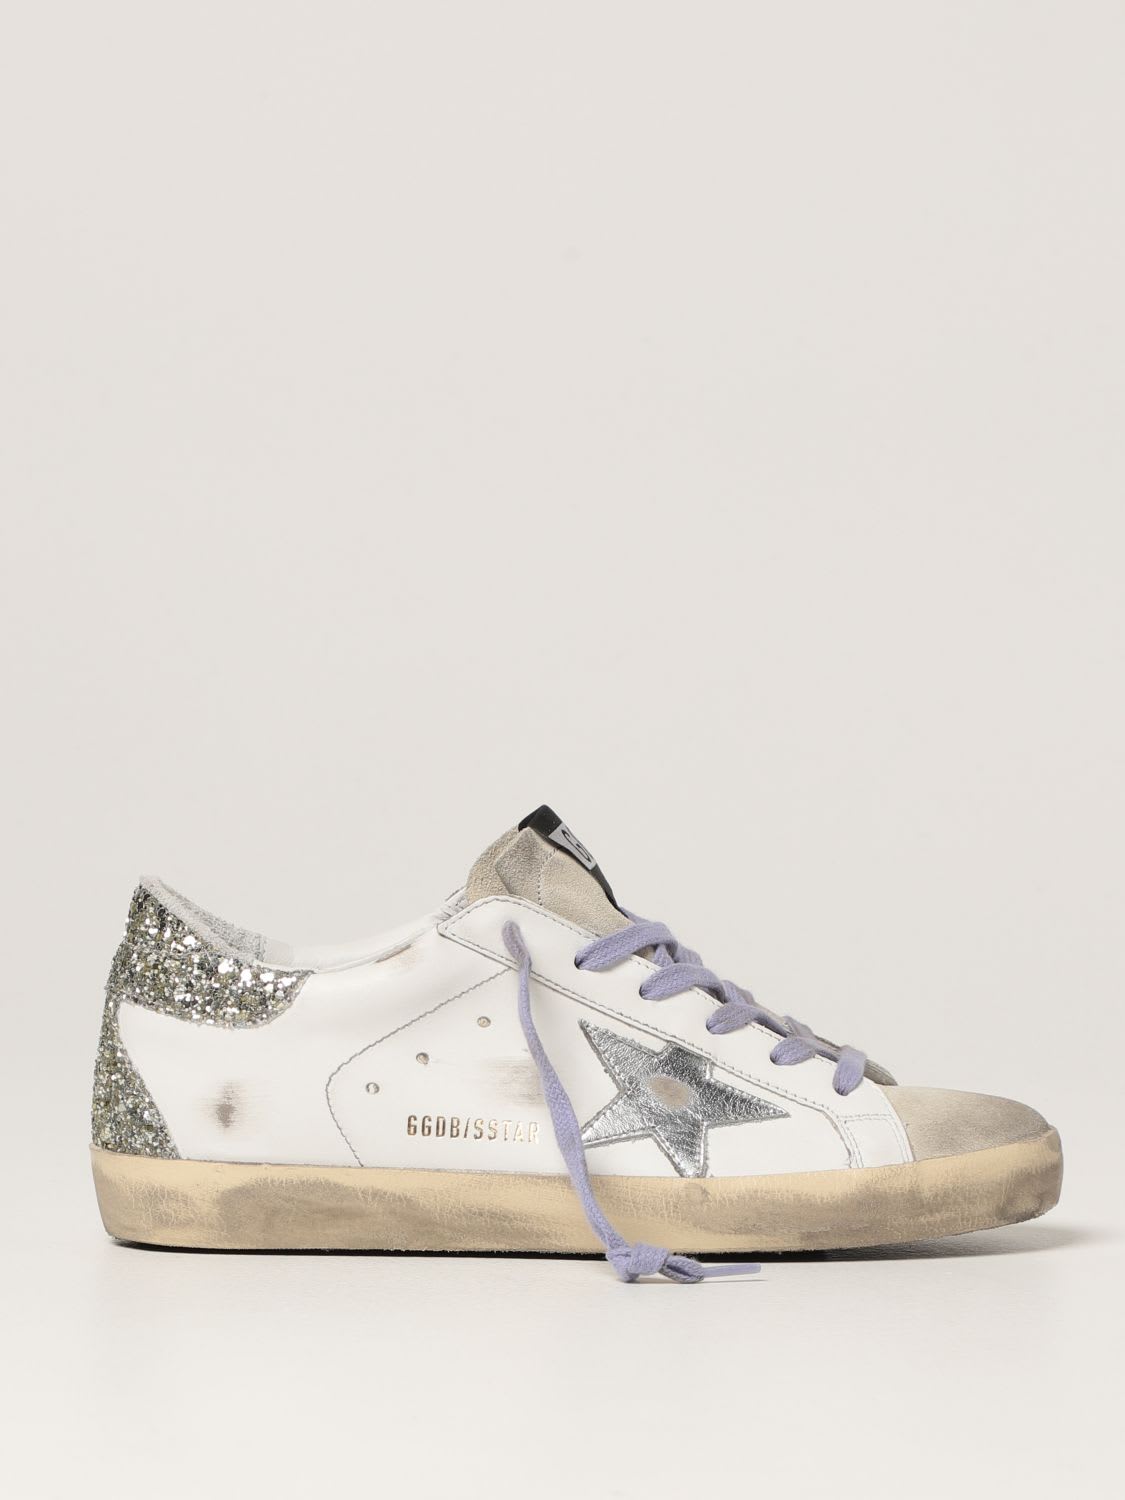 Buy Golden Goose Sneakers Superstar Classic Golden Goose Sneakers In Leather And Glitter online, shop Golden Goose shoes with free shipping